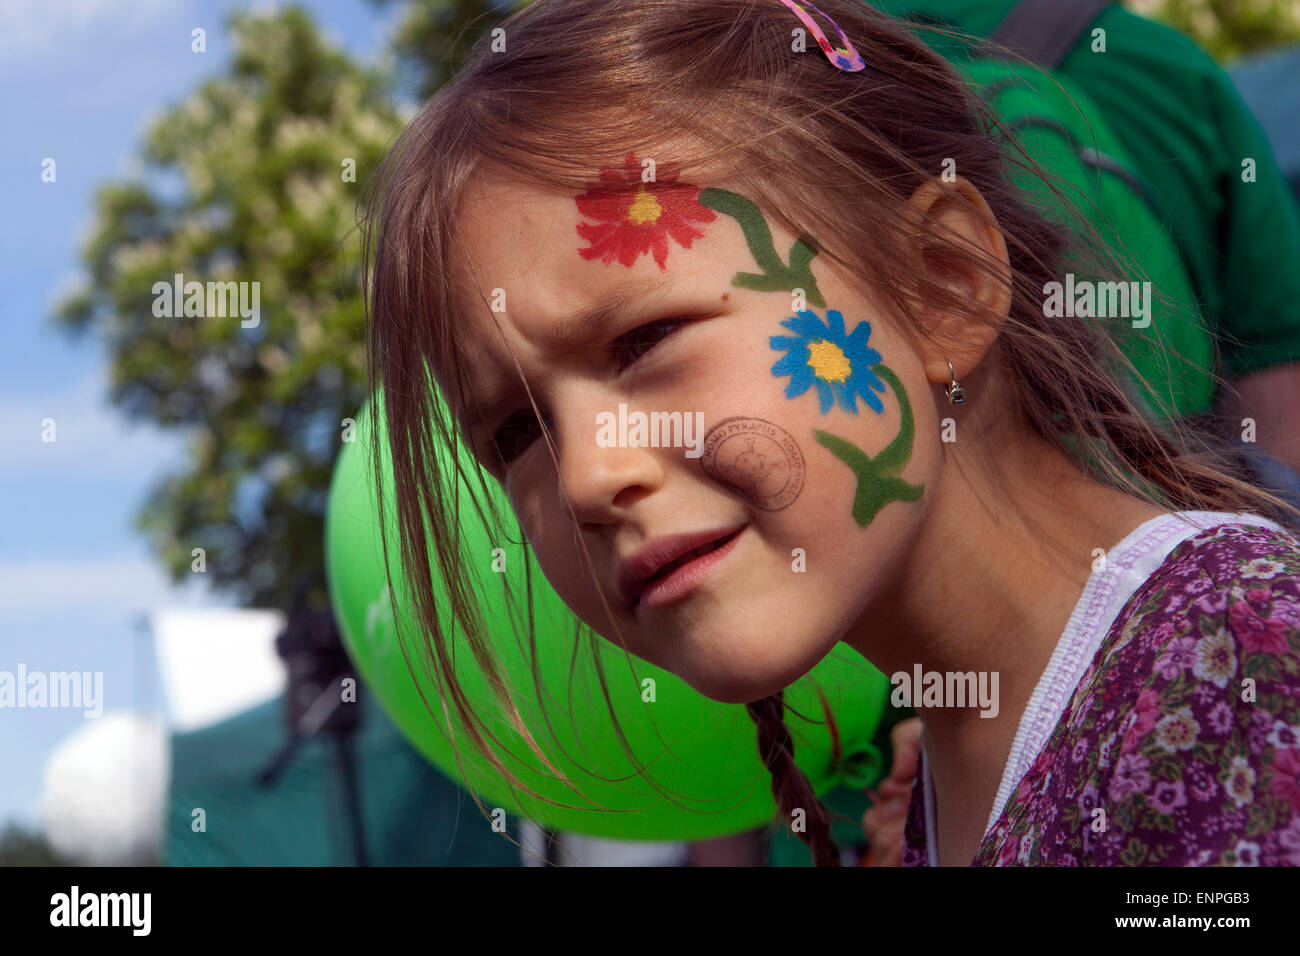 Girl with painted flowers on her face child face painting Stock Photo